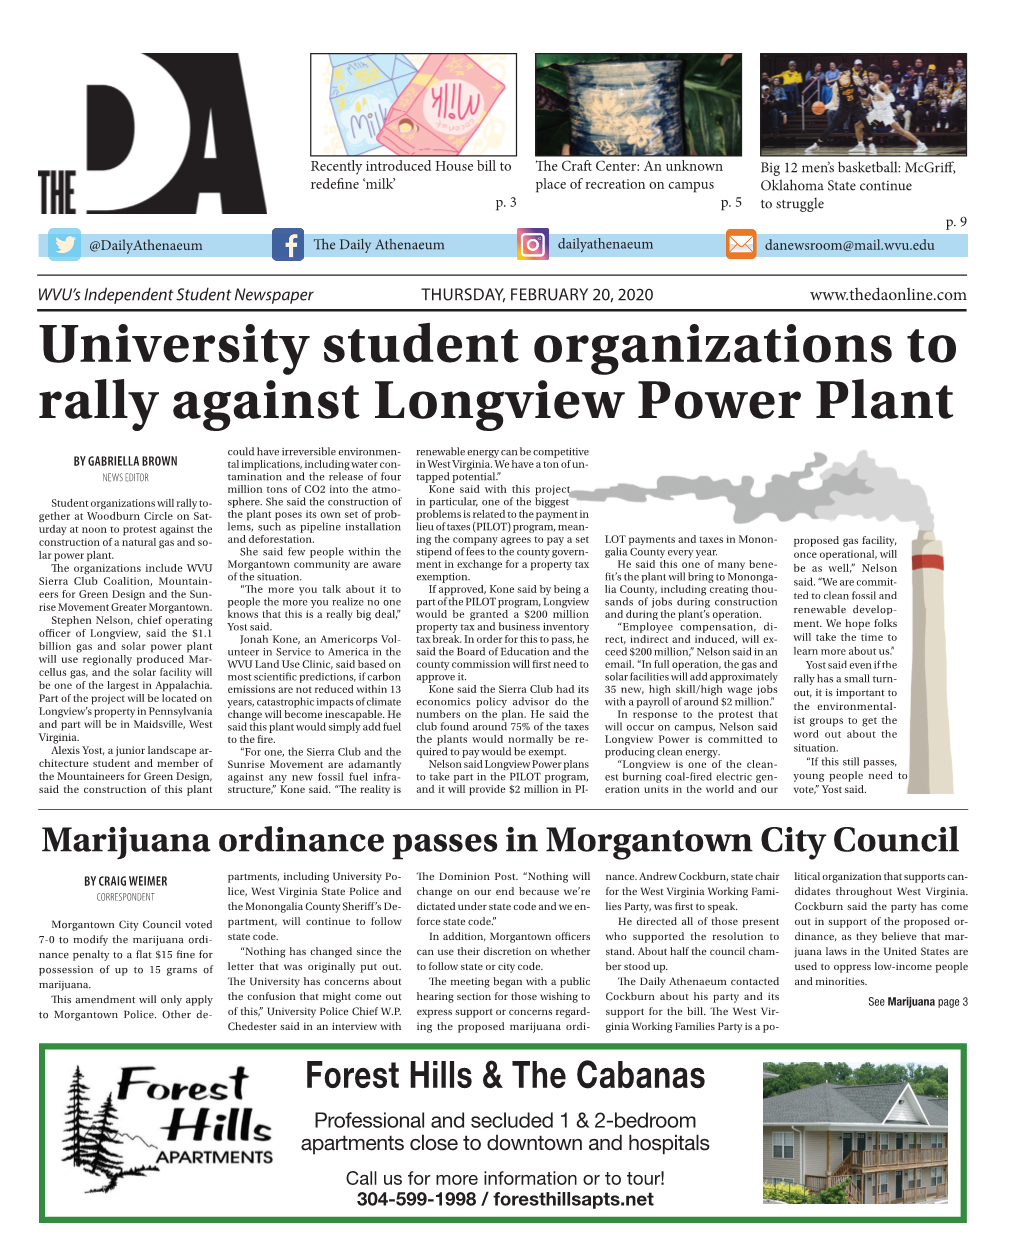 University Student Organizations to Rally Against Longview Power Plant